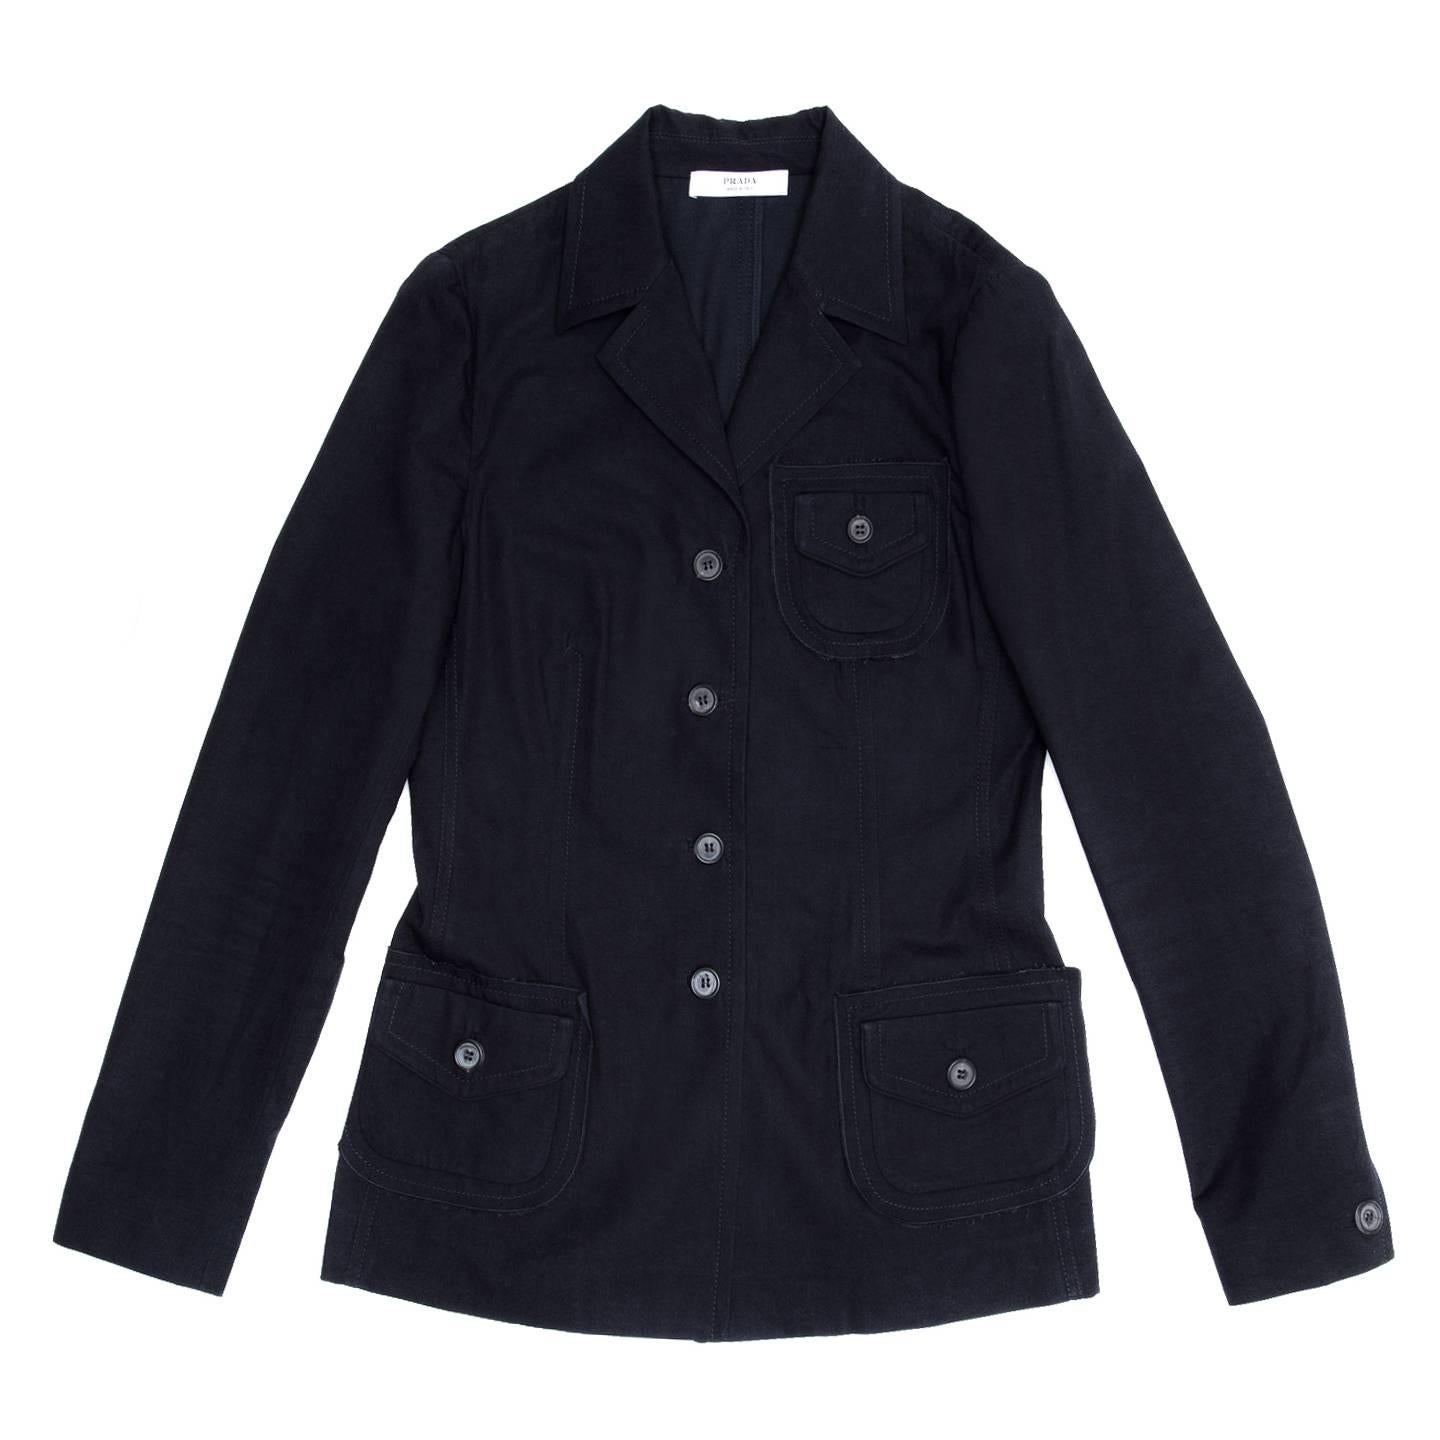 Prada navy cotton casual jacket with 4 buttons opening and small lapel. The front is decorated with three patch pockets with raw edges, flap and button. The fit is tight and hip length and all the seams are enriched by tone-on-tone top stitches.